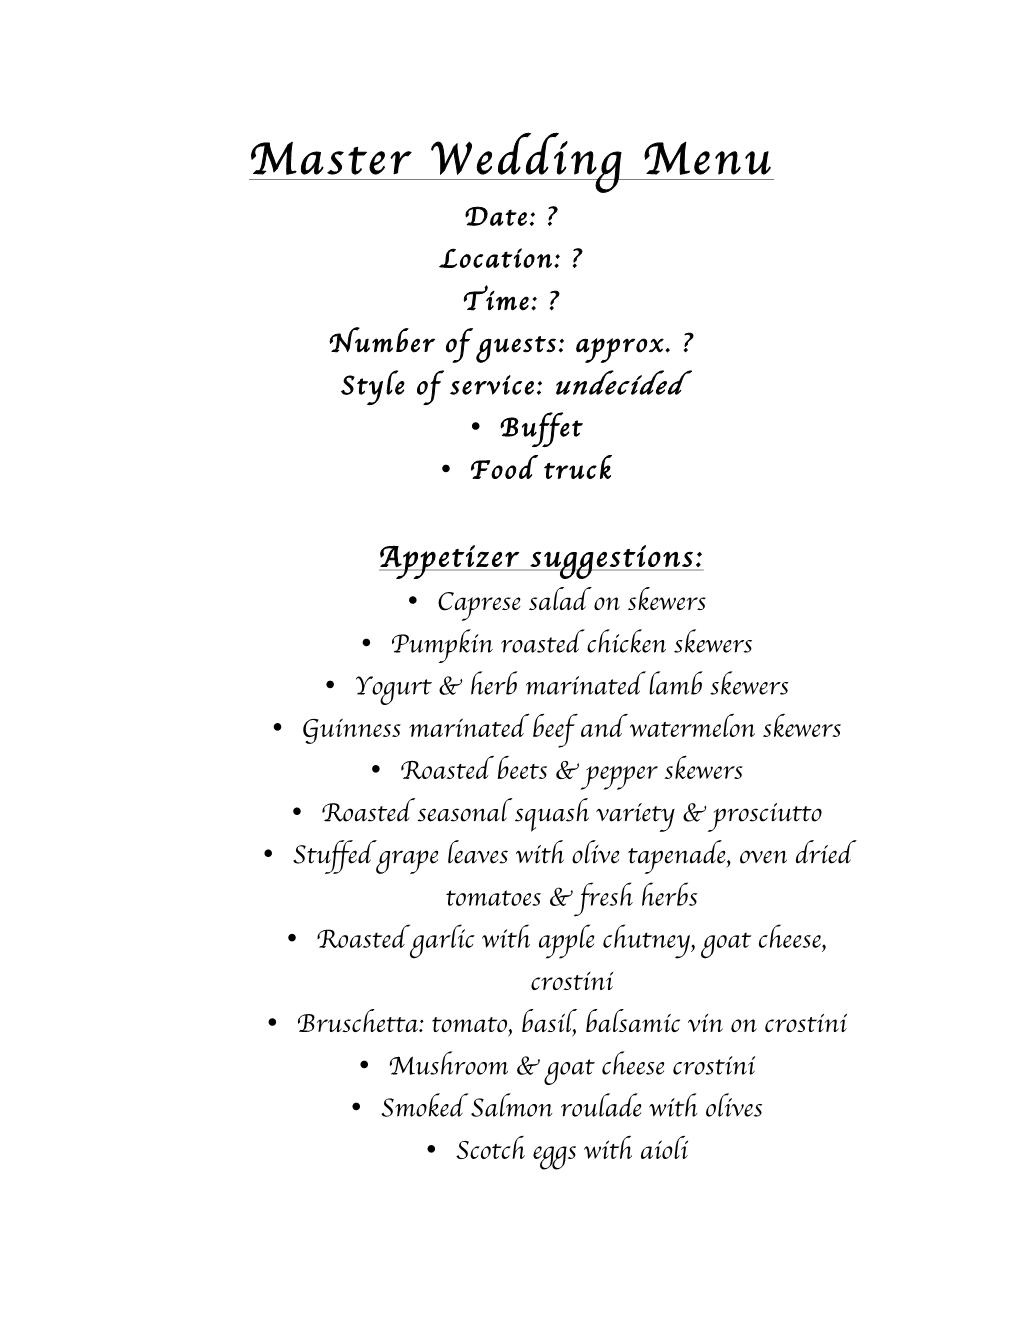 Master Wedding Menu Date: ? Location: ? Time: ? Number of Guests: Approx